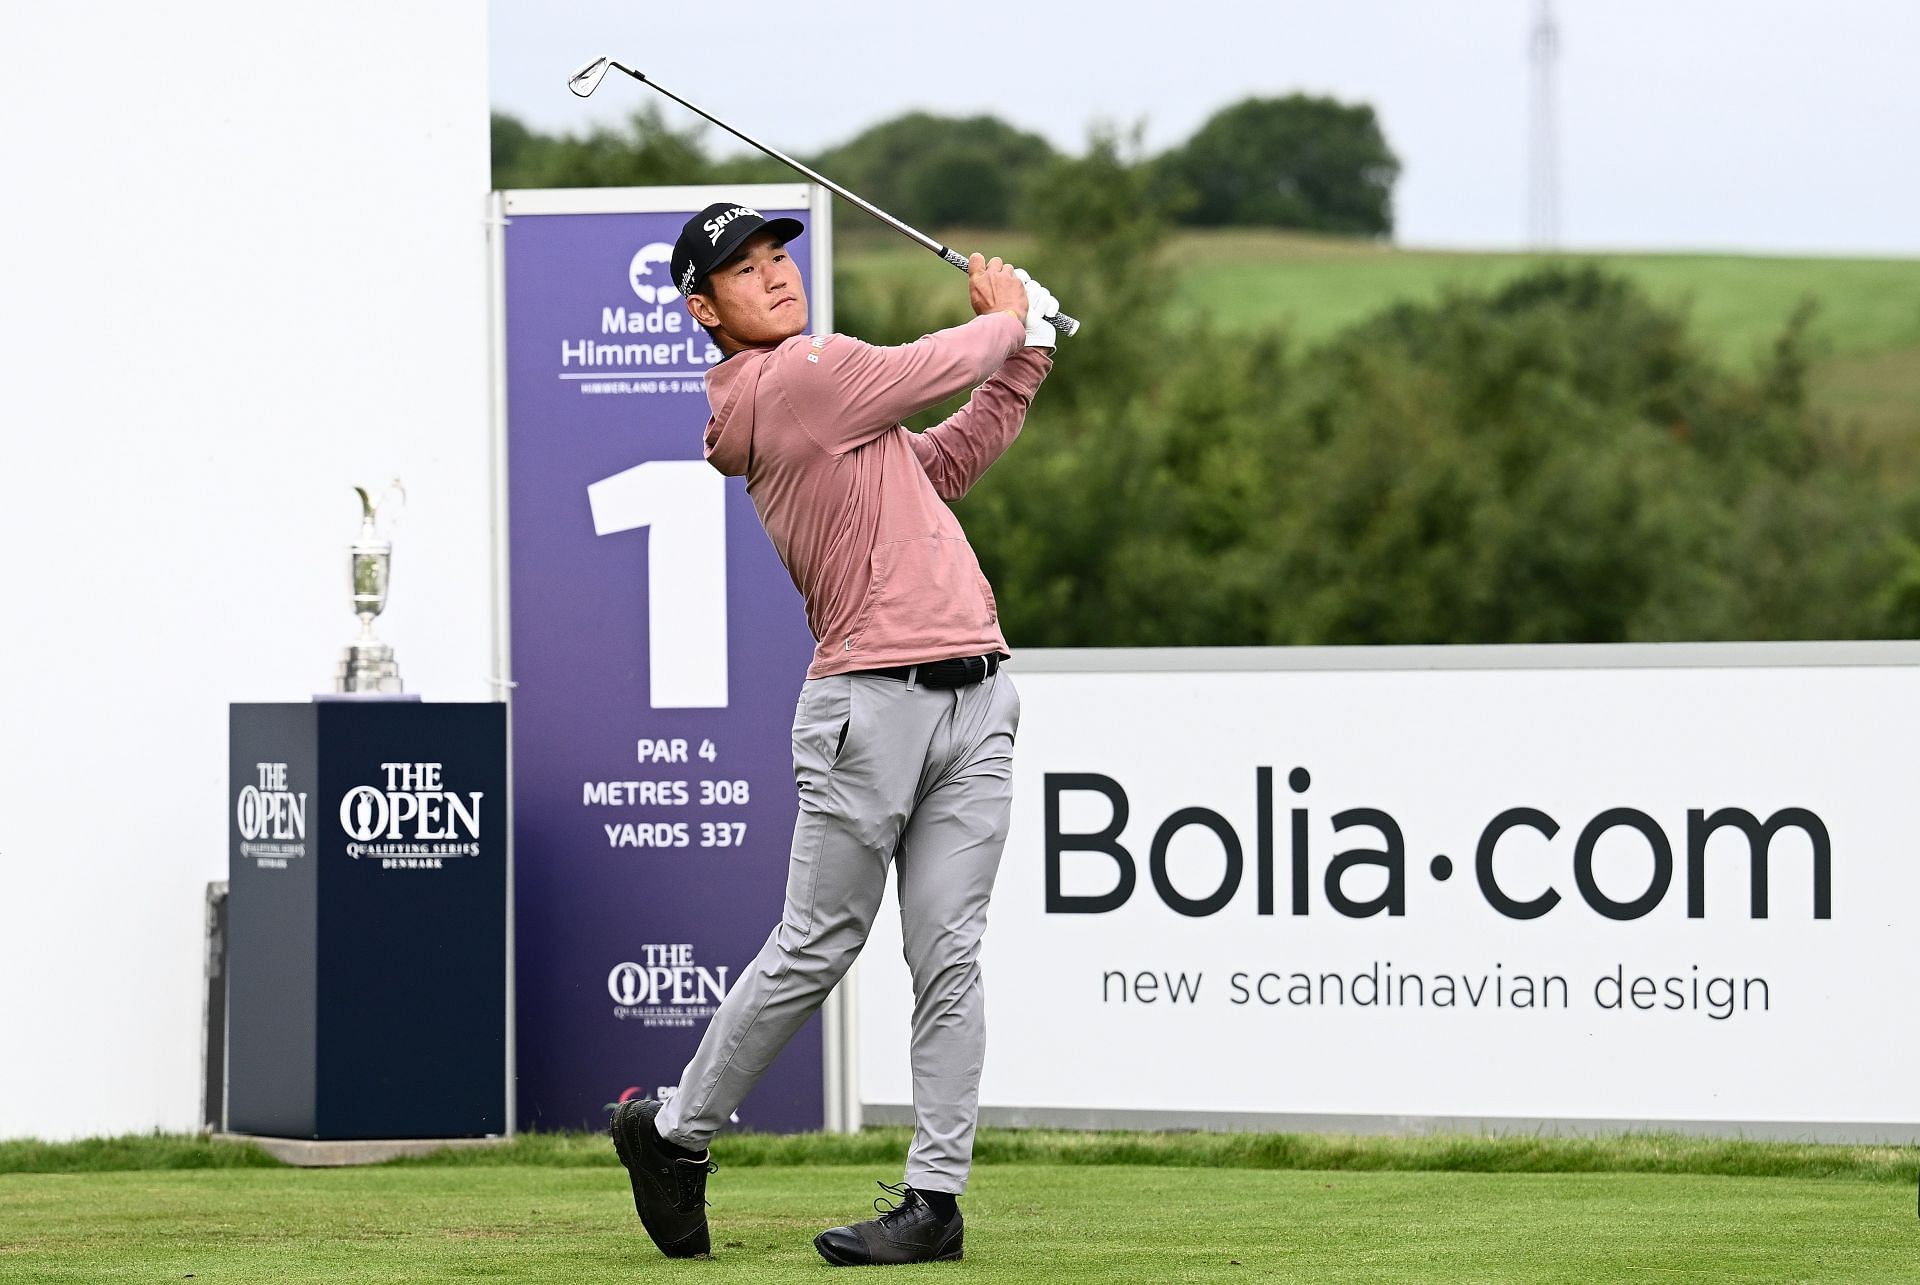 Made in HimmerLand - Day Two